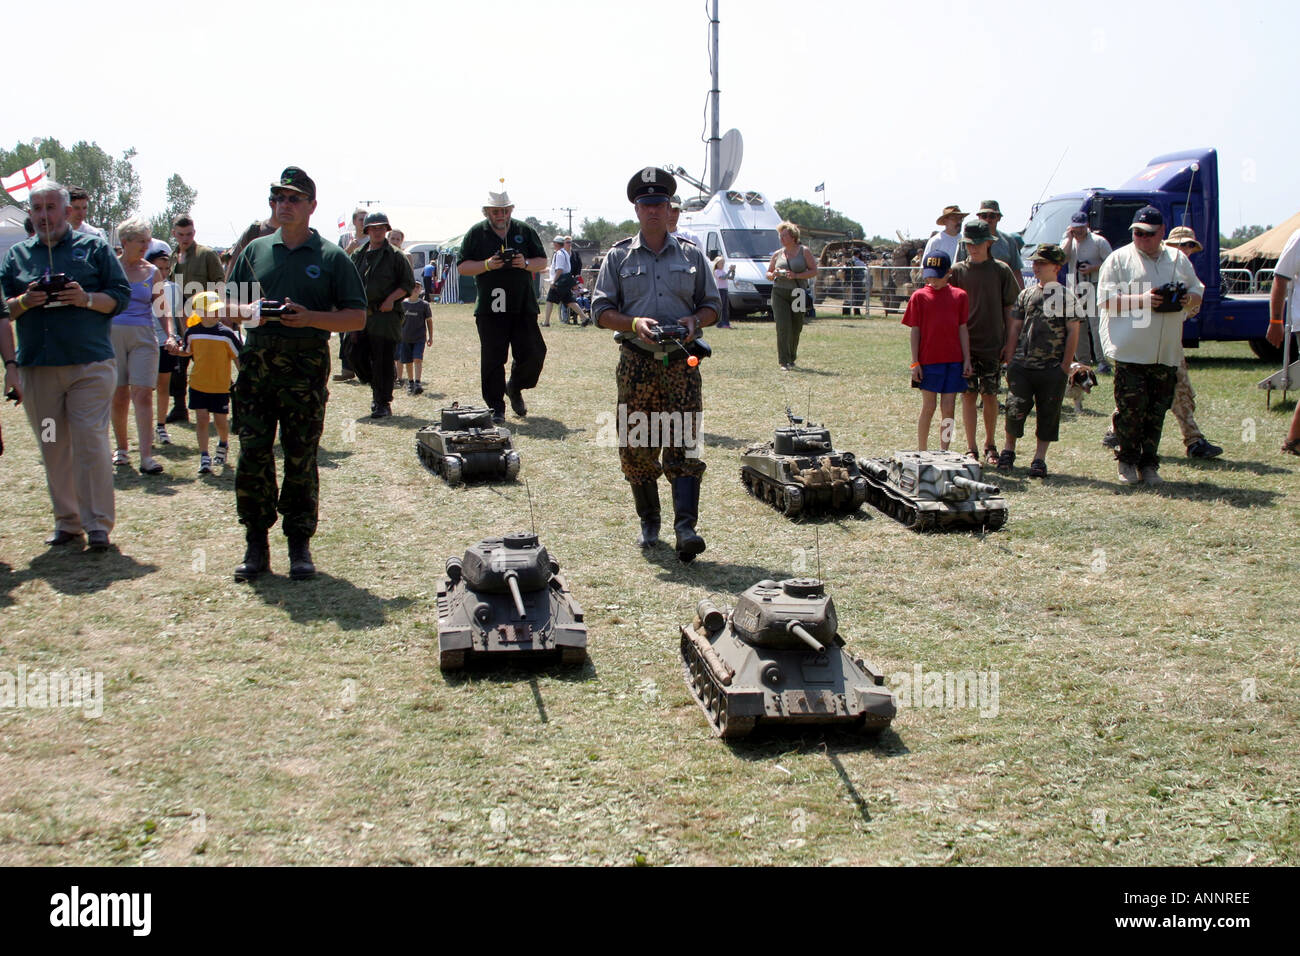 Group of old men walking their remote control tanks Stock Photo